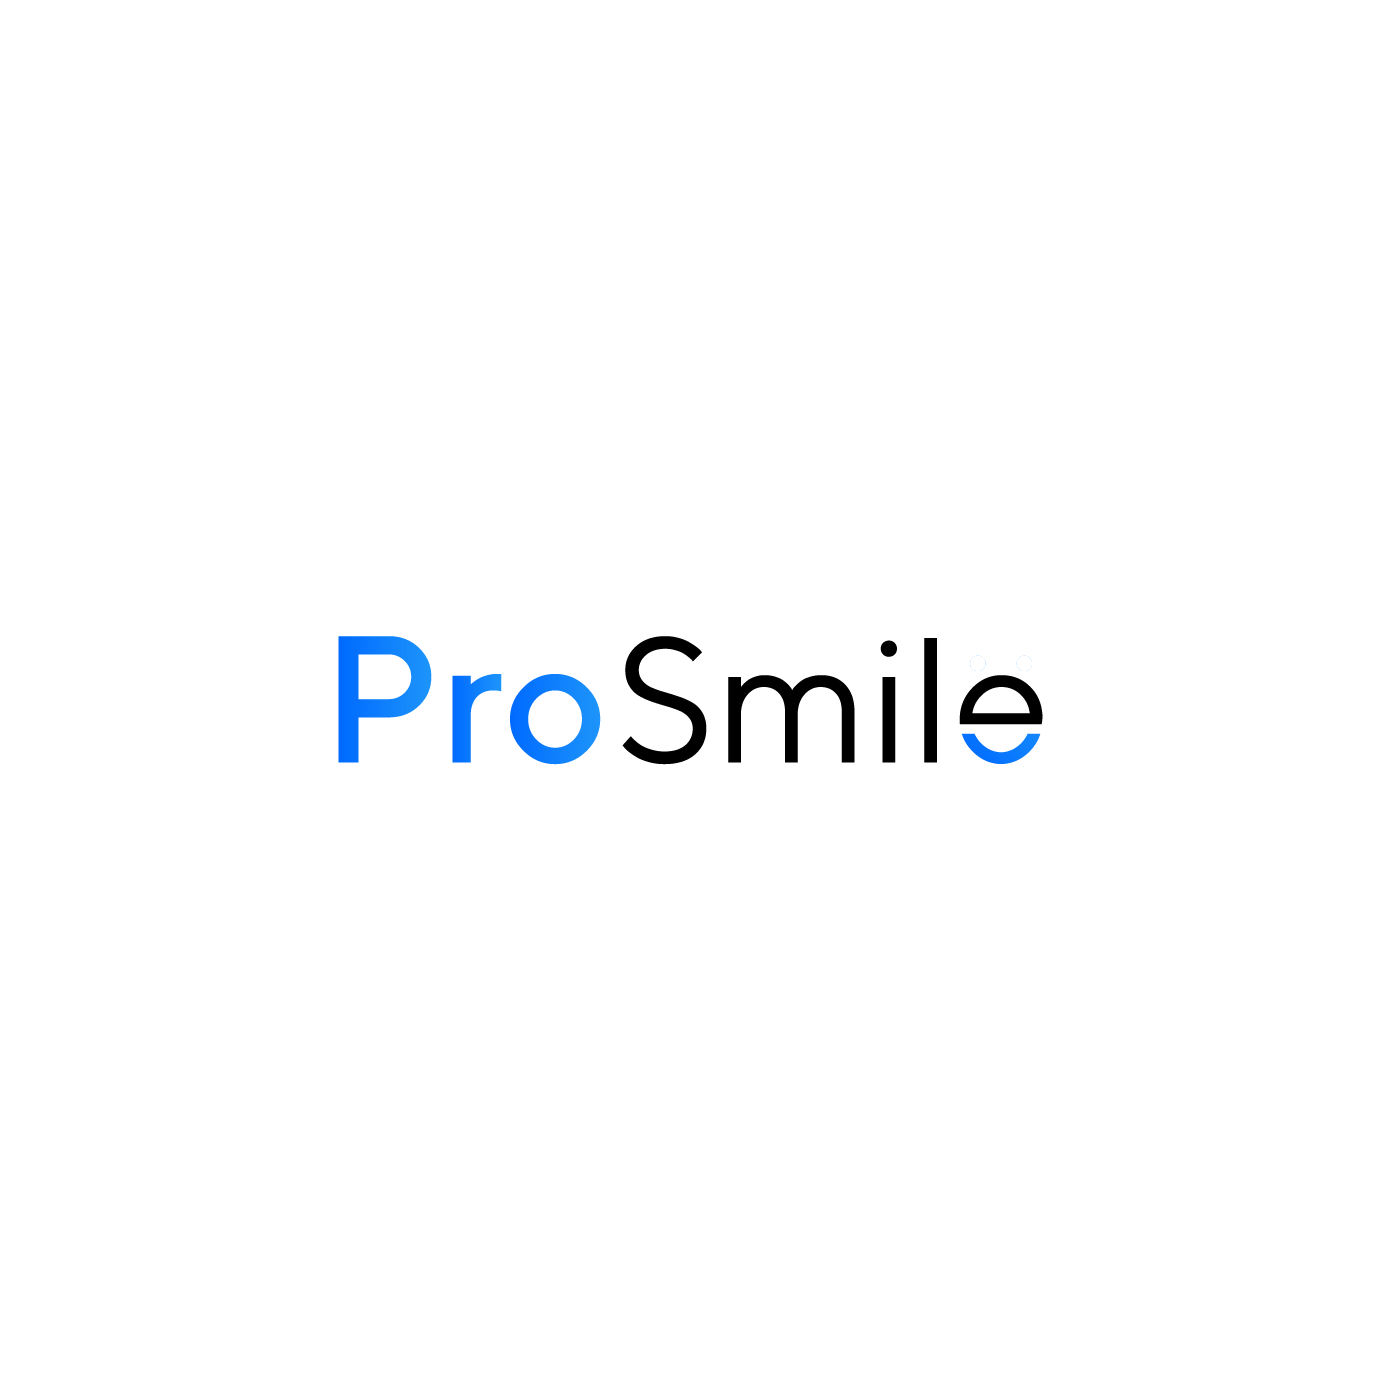 ProSmile Completes Acquisition of Four Dental Practices